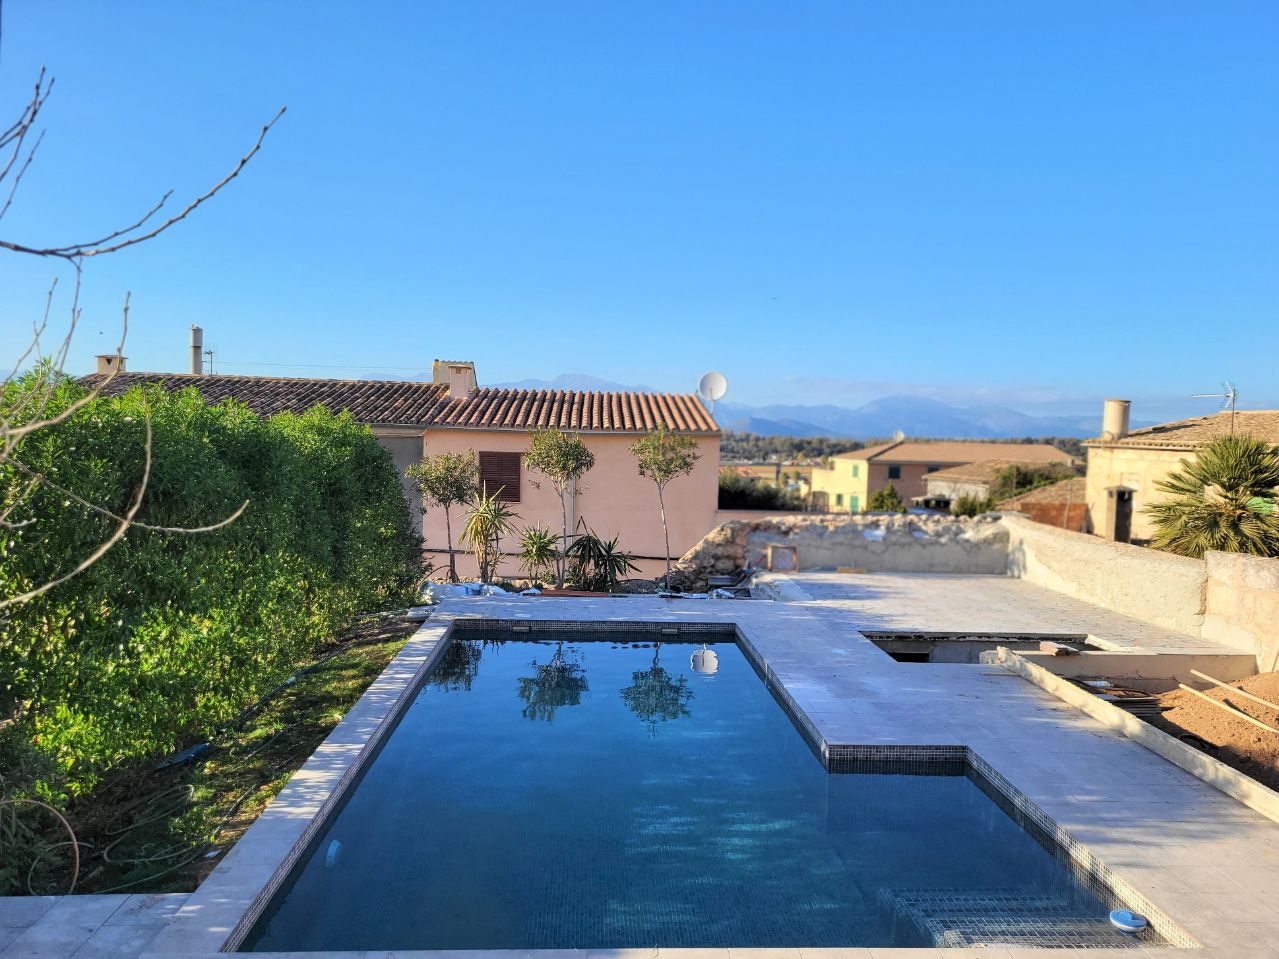 Holiday rentals in Inca Mallorca and rural villages